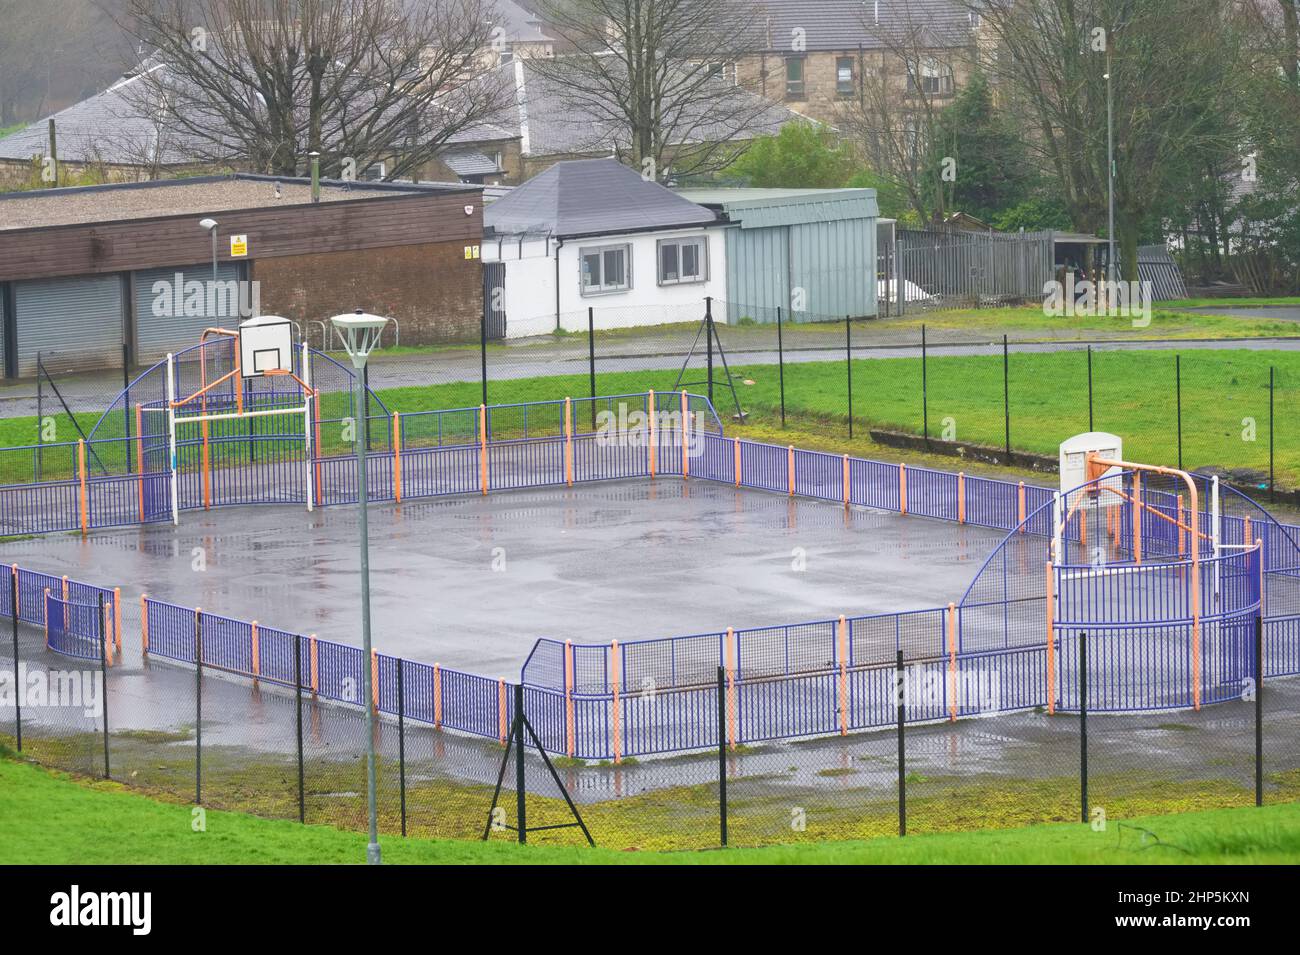 Basketball court outdoors in public play park Stock Photo Alamy